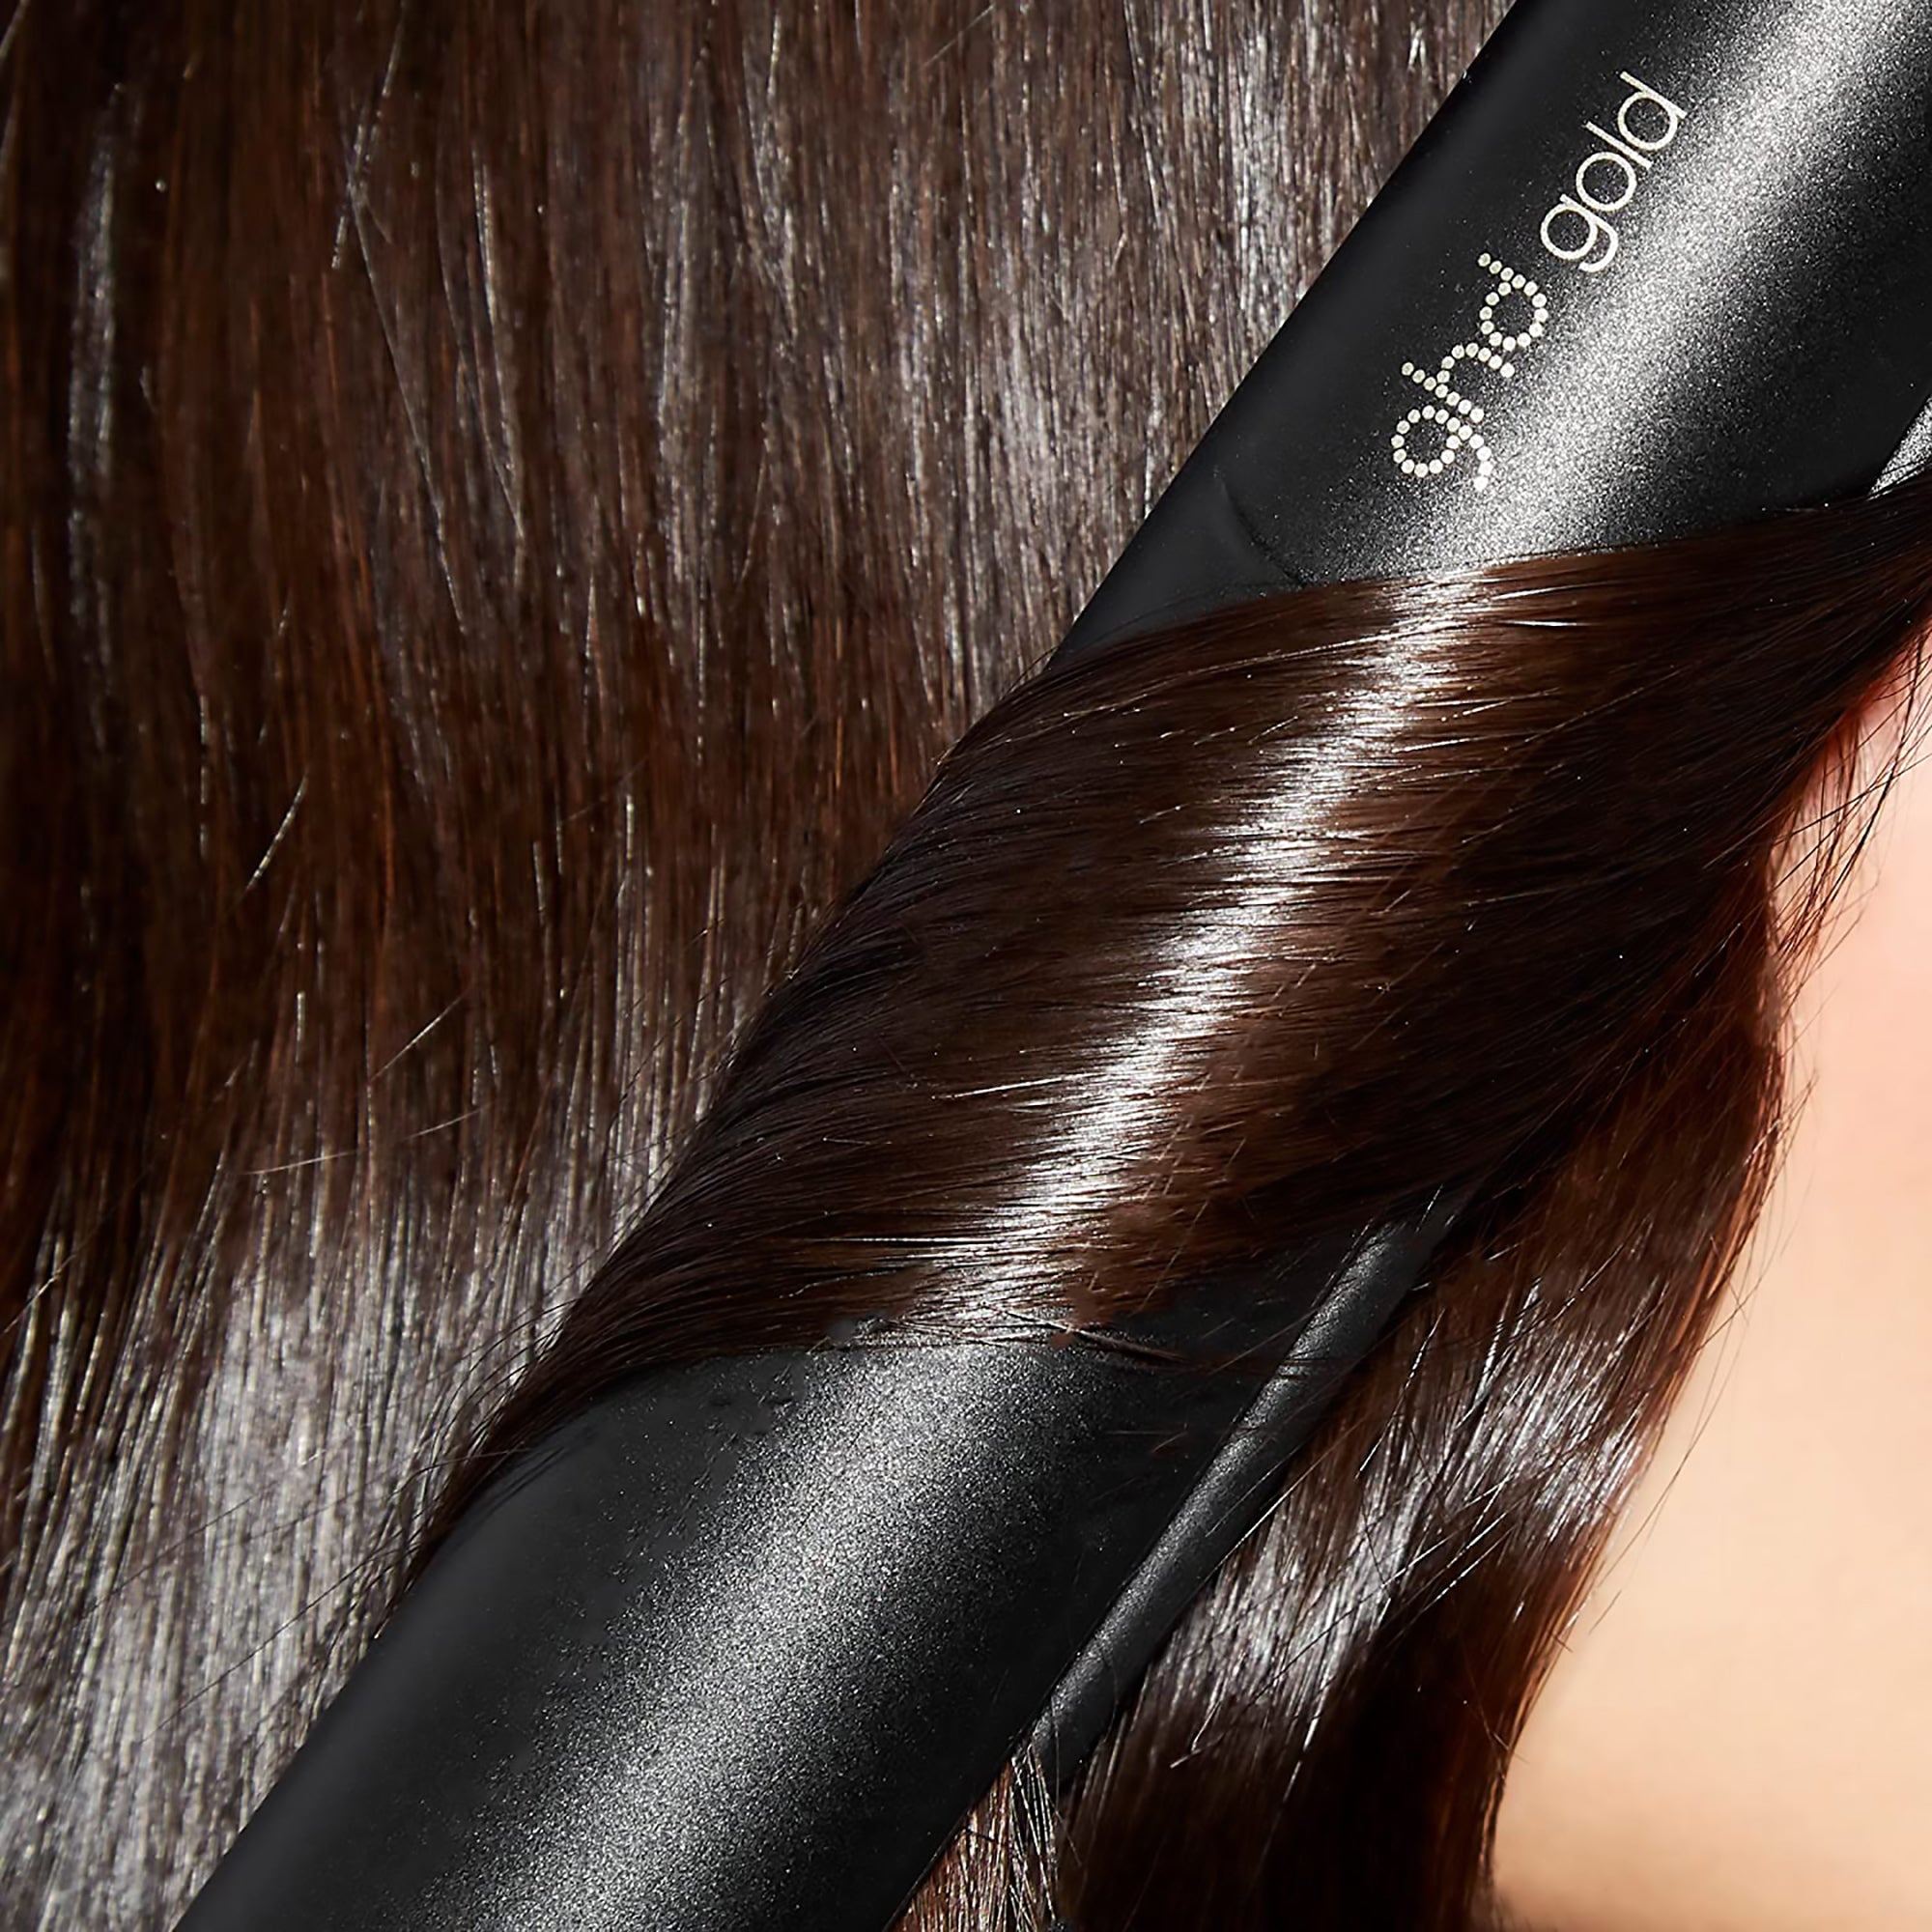 GHD Gold Professional Styler / 1"